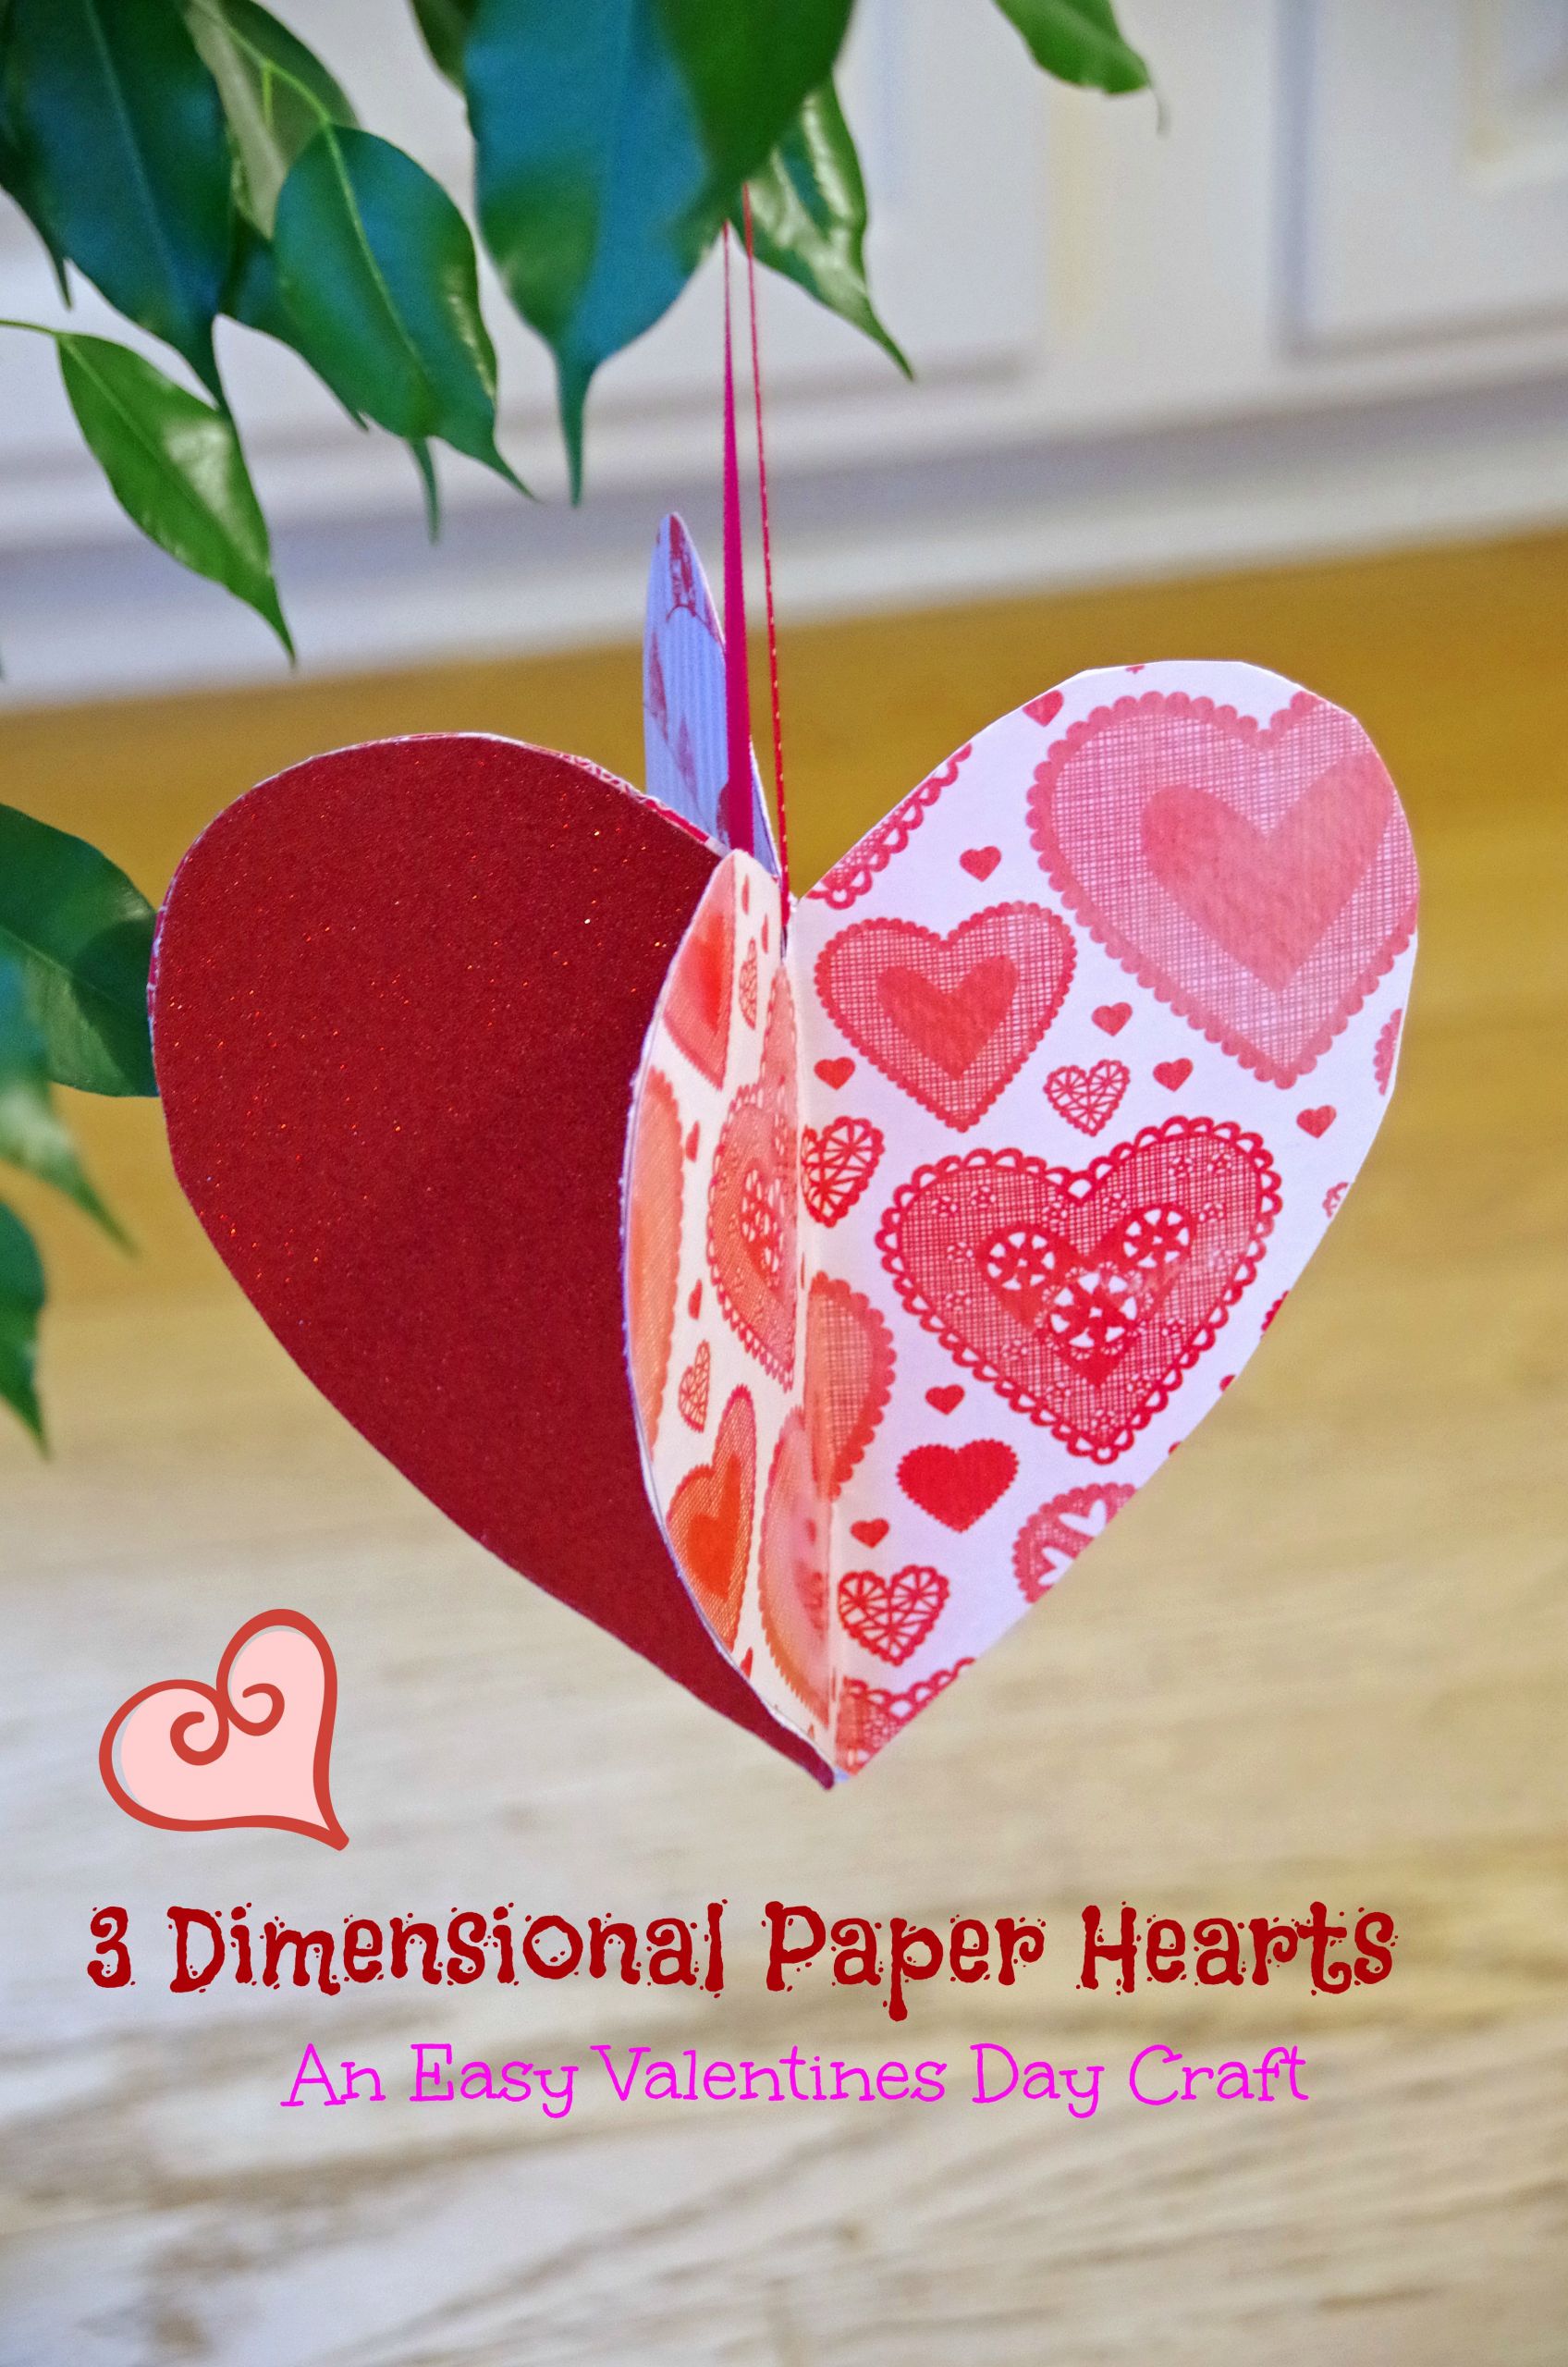 Valentine'S Day Craft Ideas For Toddlers
 Easy Valentines Day Craft Idea Make 3D Paper Hearts